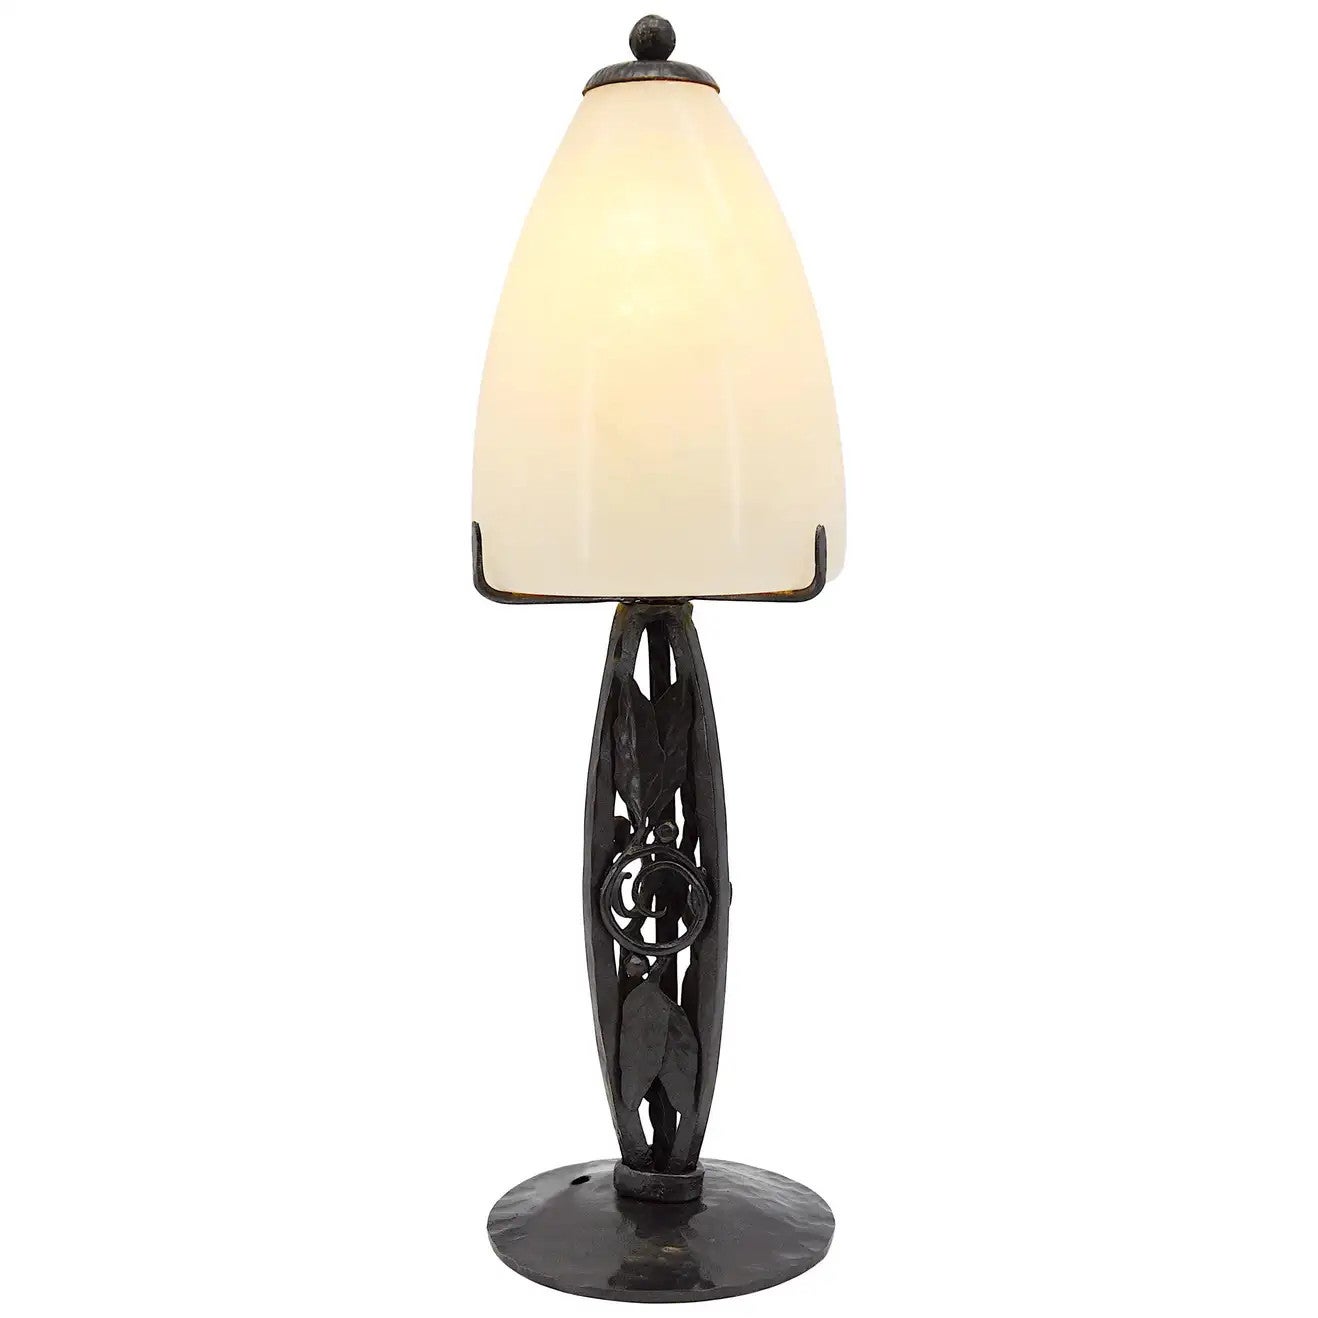 French Art Deco Alabaster Table Lamp, 1920s